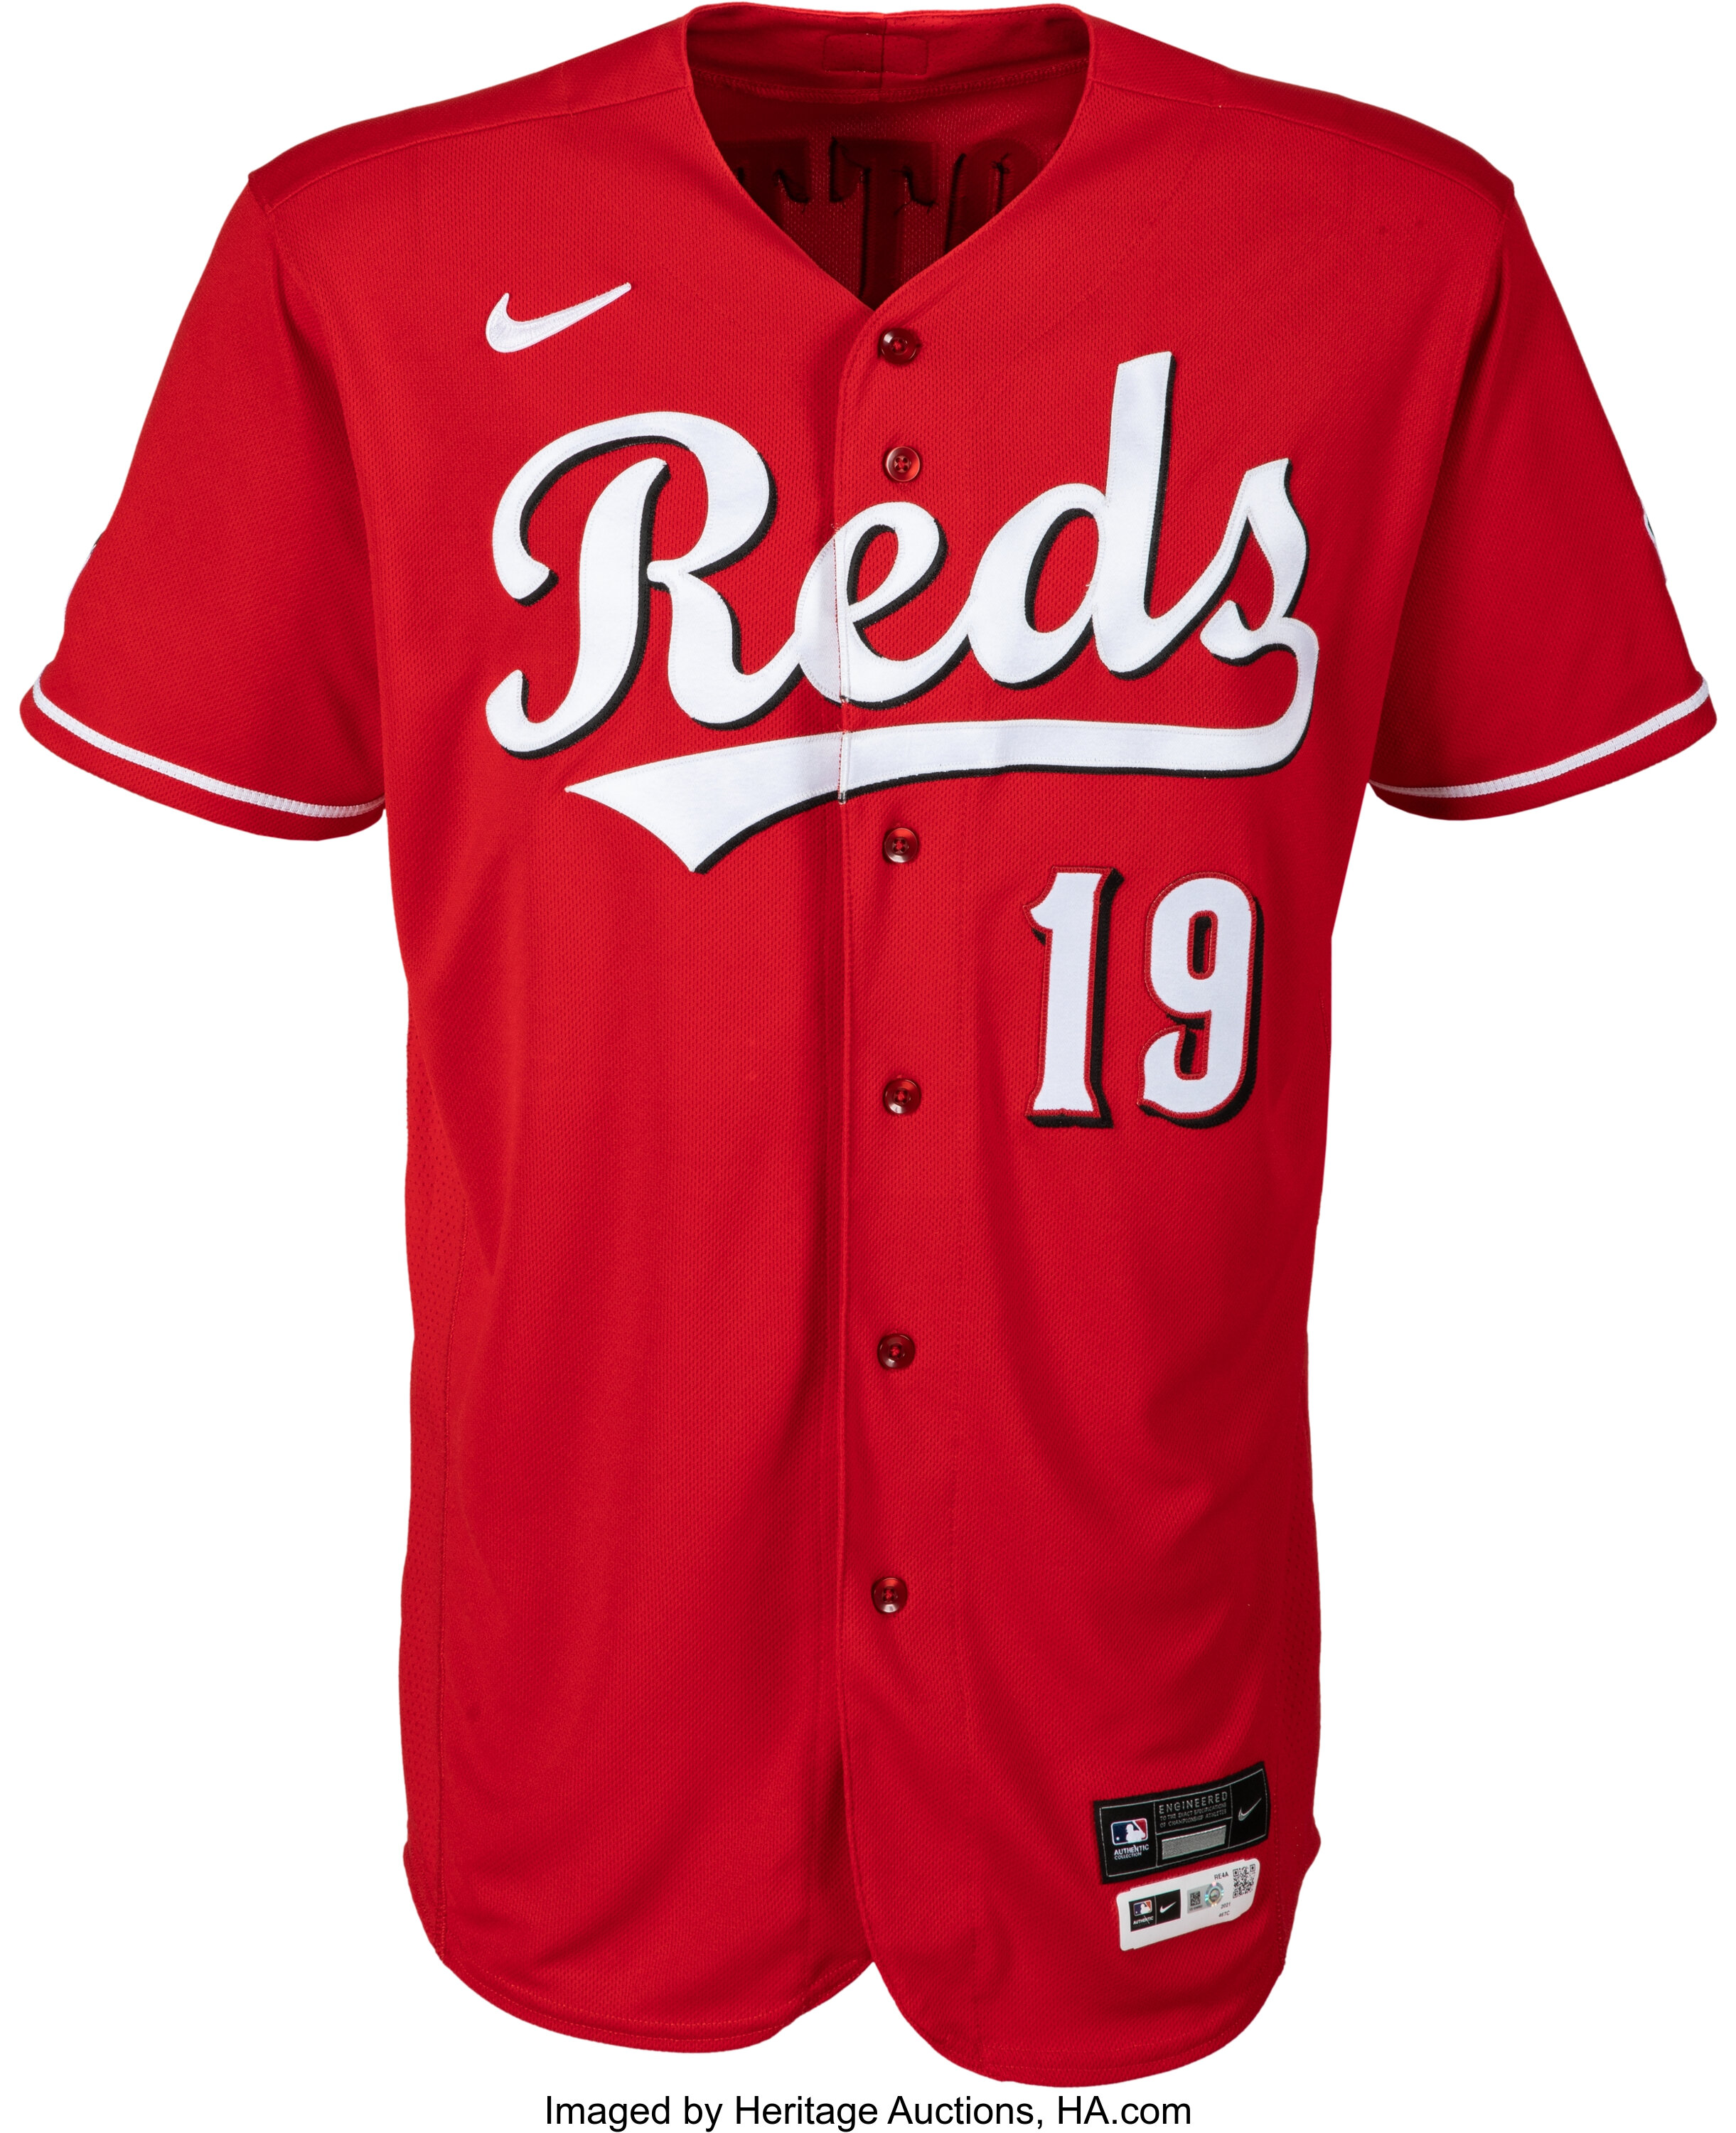 Cincinnati Reds' City Connect jerseys to be unveiled, debut in May